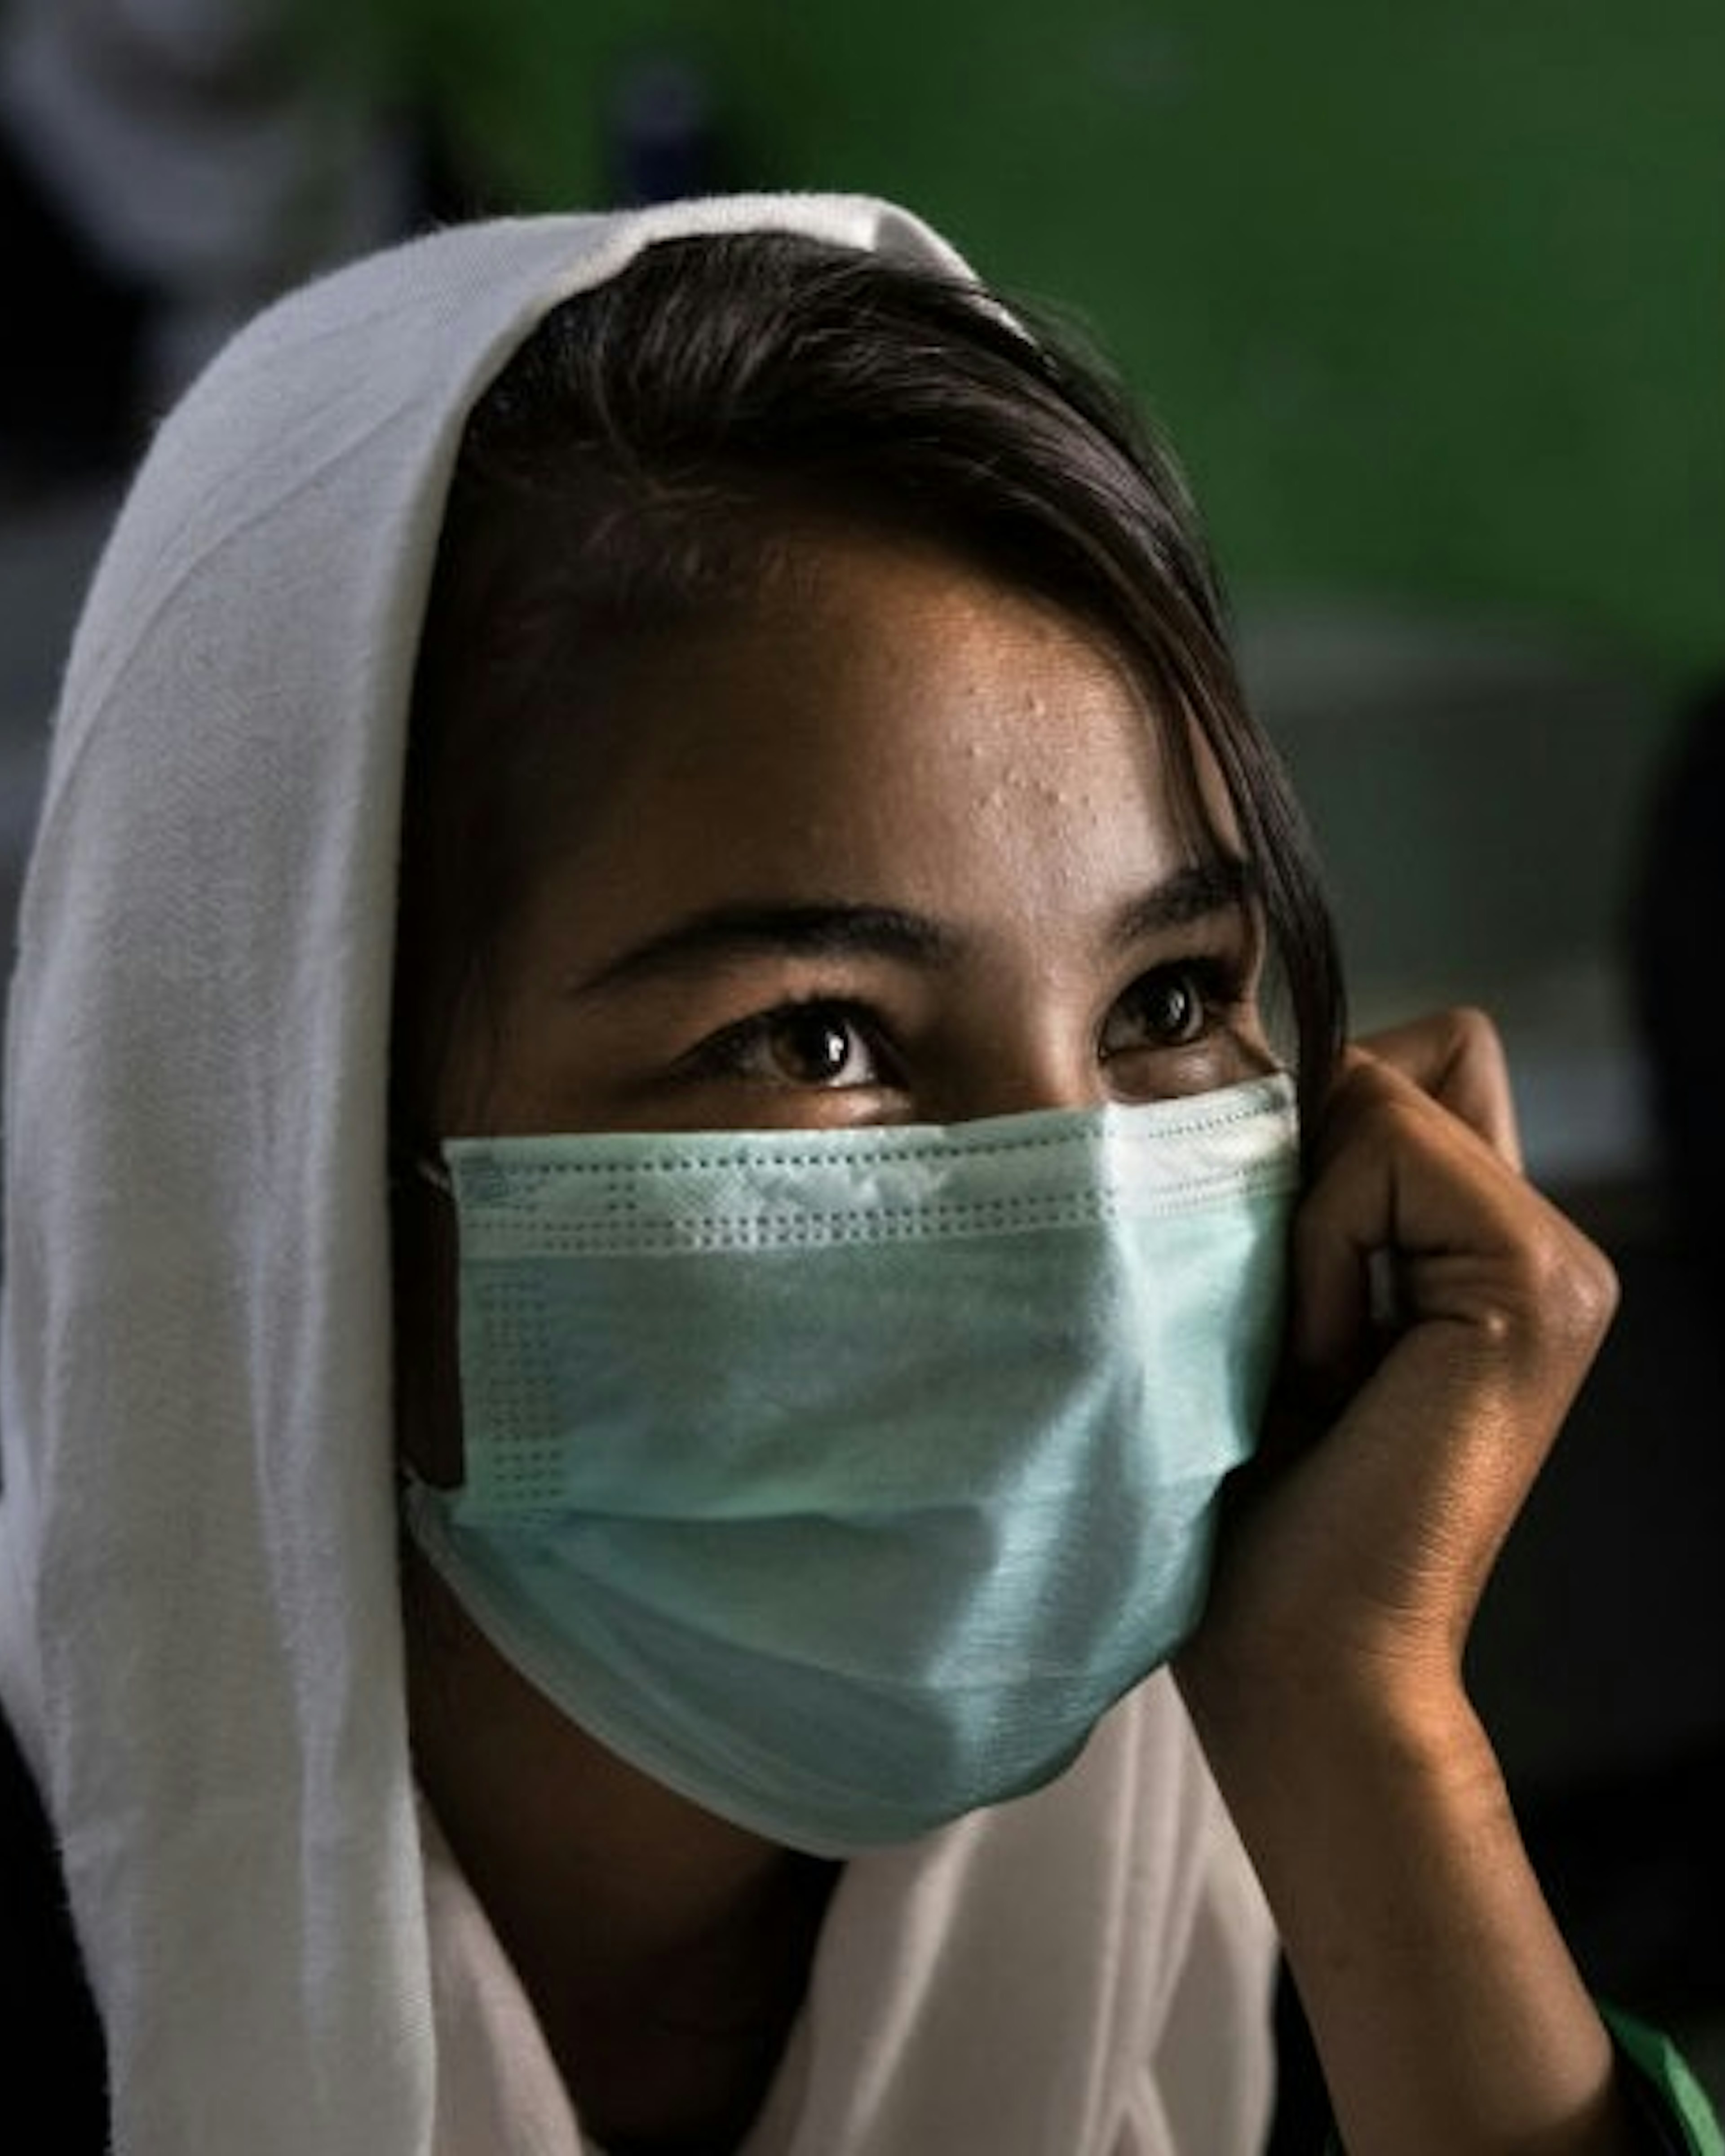 Afghan Girls Education: Kabul Giirls School Reopens After Coronavirus Break KABUL, AFG- JULY 25: Zainab Mirzayee,15, listens during 10th-grade class at the Zarghoona high school on July 25 2021 in Kabul, Afghanistan. The Zarghoona girls high school is the largest in Kabul with 8,500 female students attending classes. The school opened after almost a two months break due to the coronavirus (COVID-19) pandemic. Currently there is widespread fear that the Taliban who already control around half the country will reintroduce its notorious system barring girls and women from almost all work, and access to education. The Ministry of Education has announced the opening of schools, but there are mixed reports in many areas where the Taliban have taken control or where fighting is ongoing. (Photo by Paula Bronstein /Getty Images) Paula Bronstein / Stringer via Getty Images